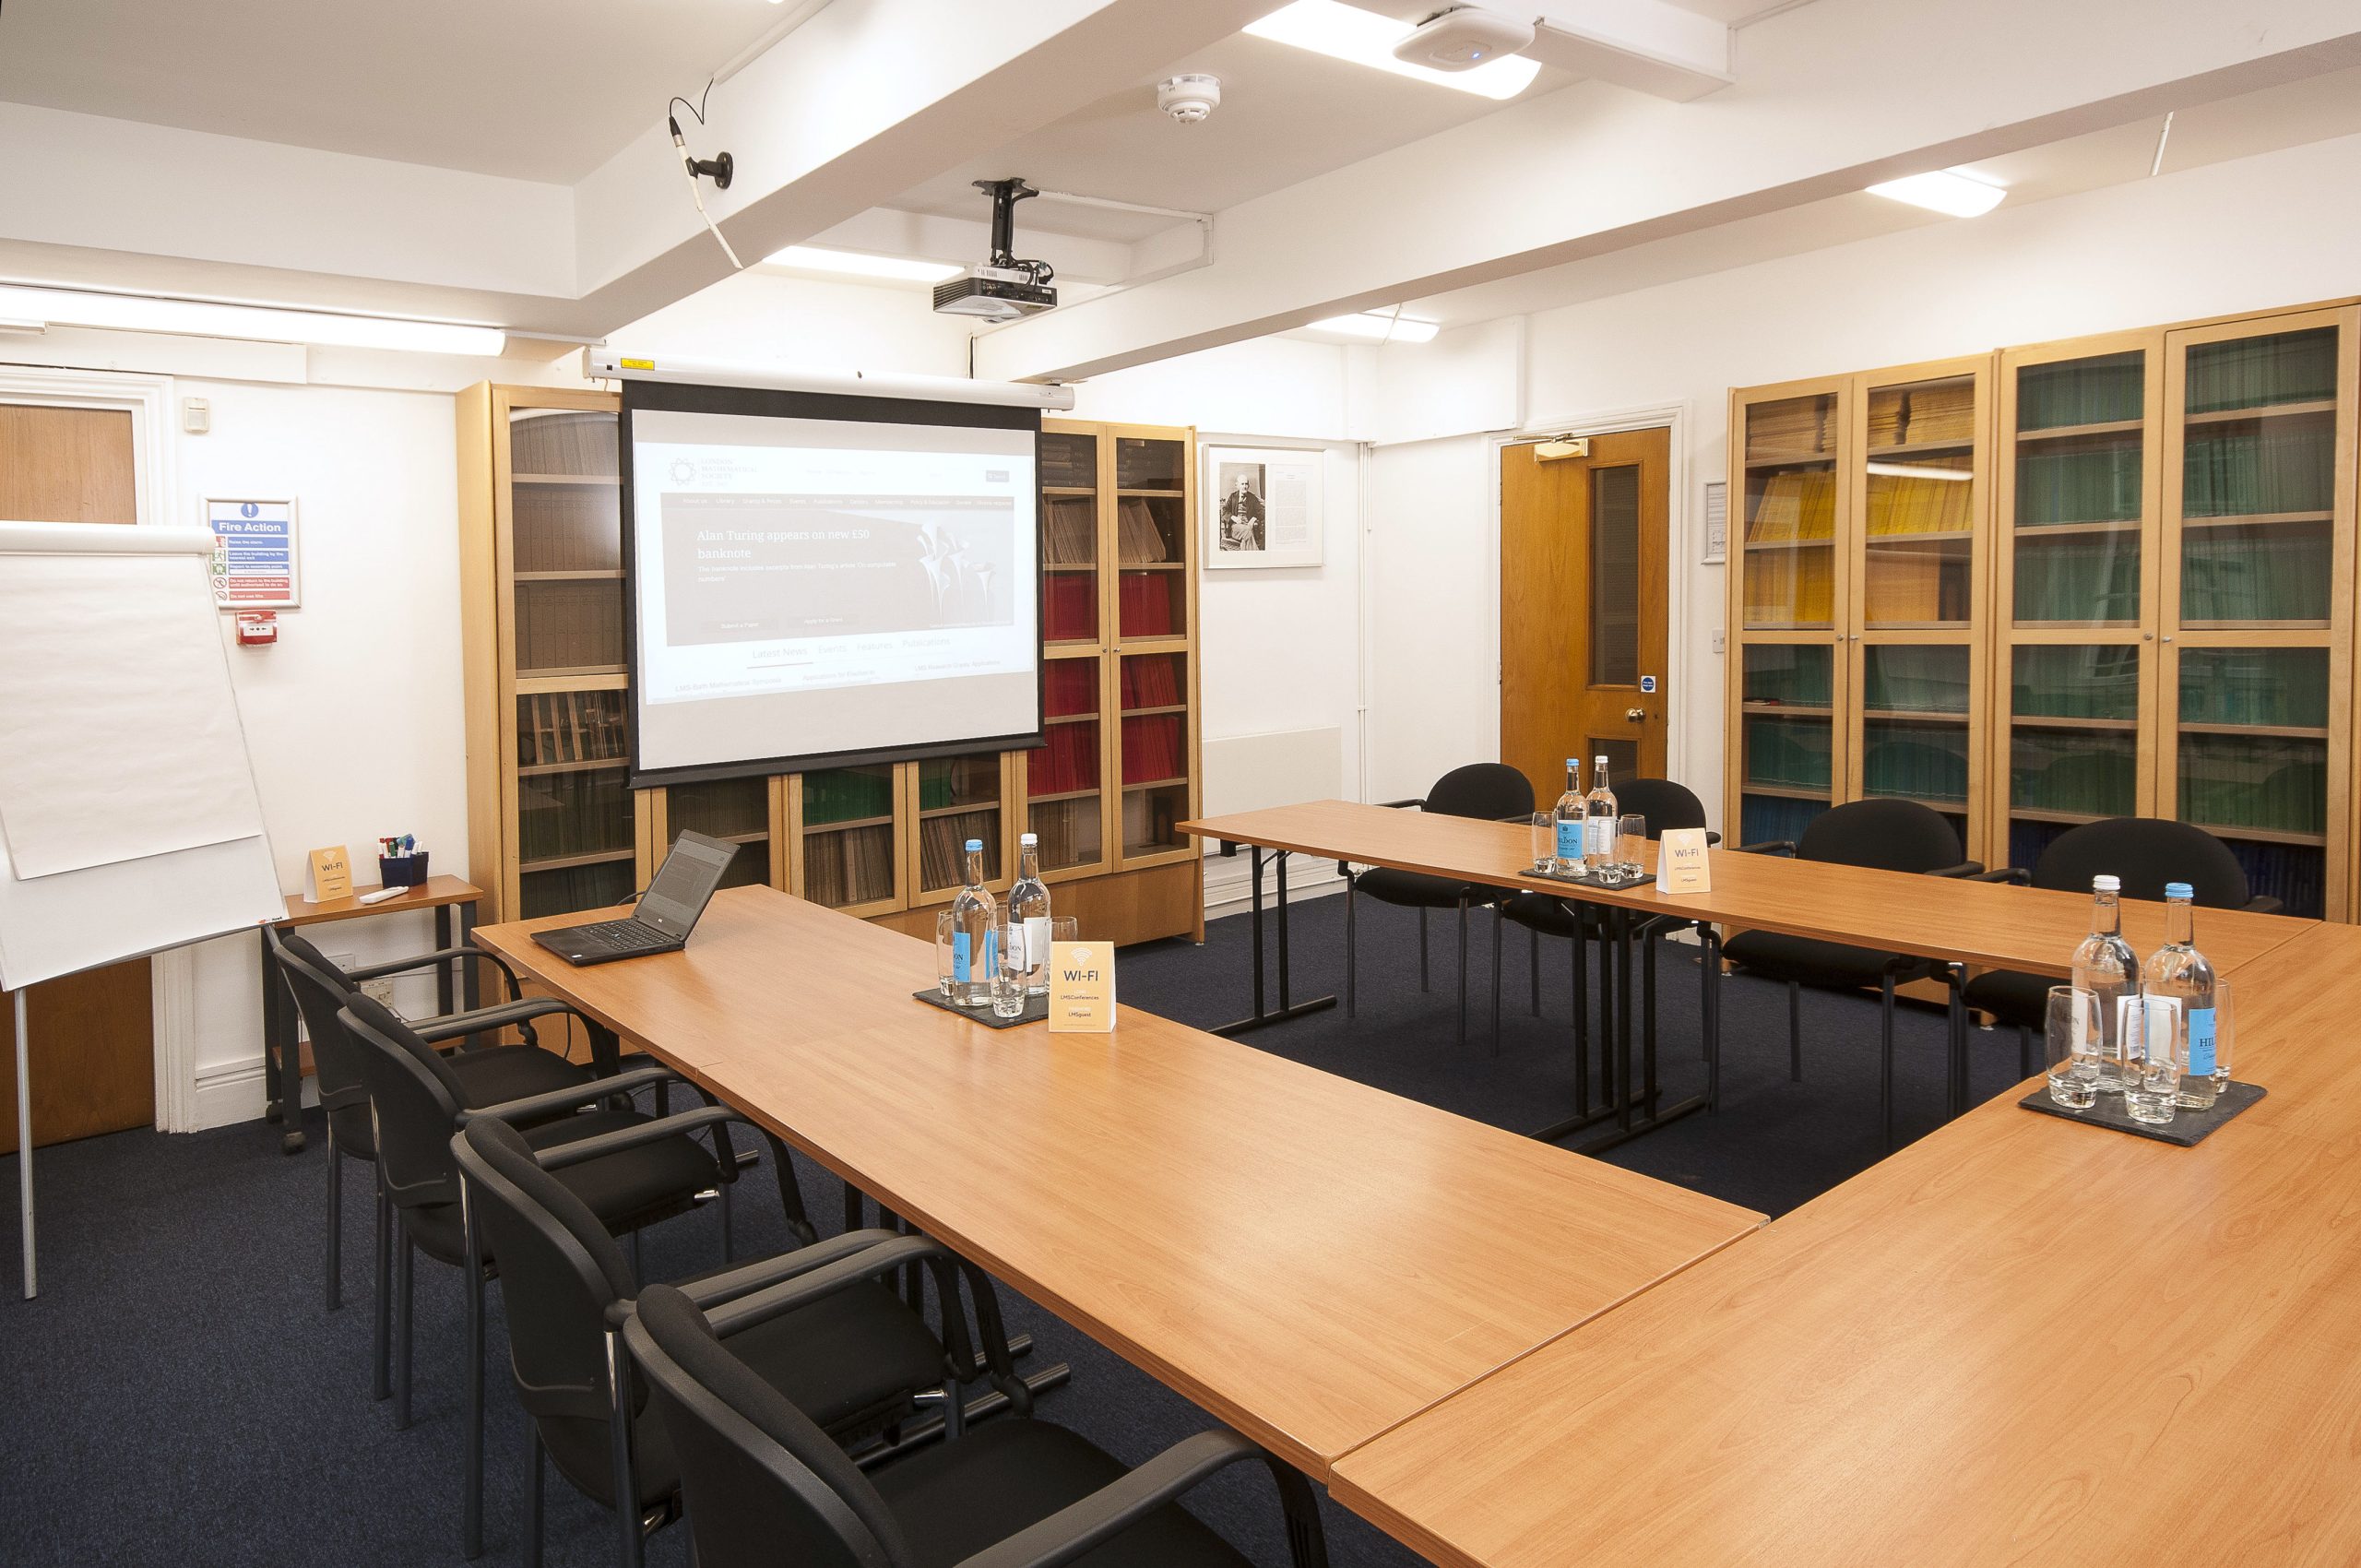 Photo of a medium sized meeting room in a boardroom style